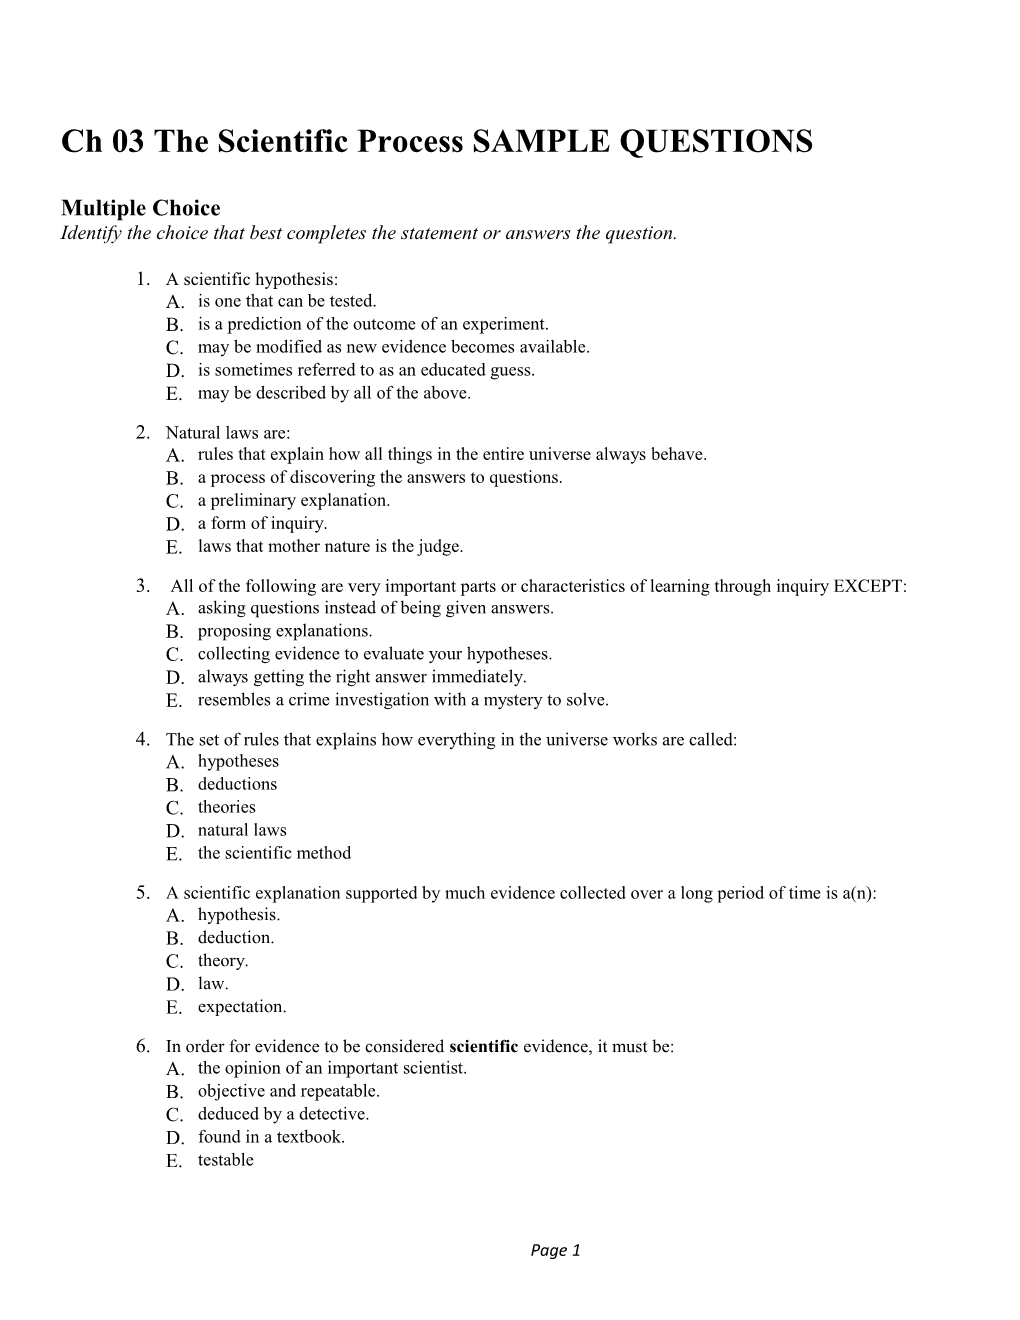 Ch 03 the Scientific Process SAMPLE QUESTIONS